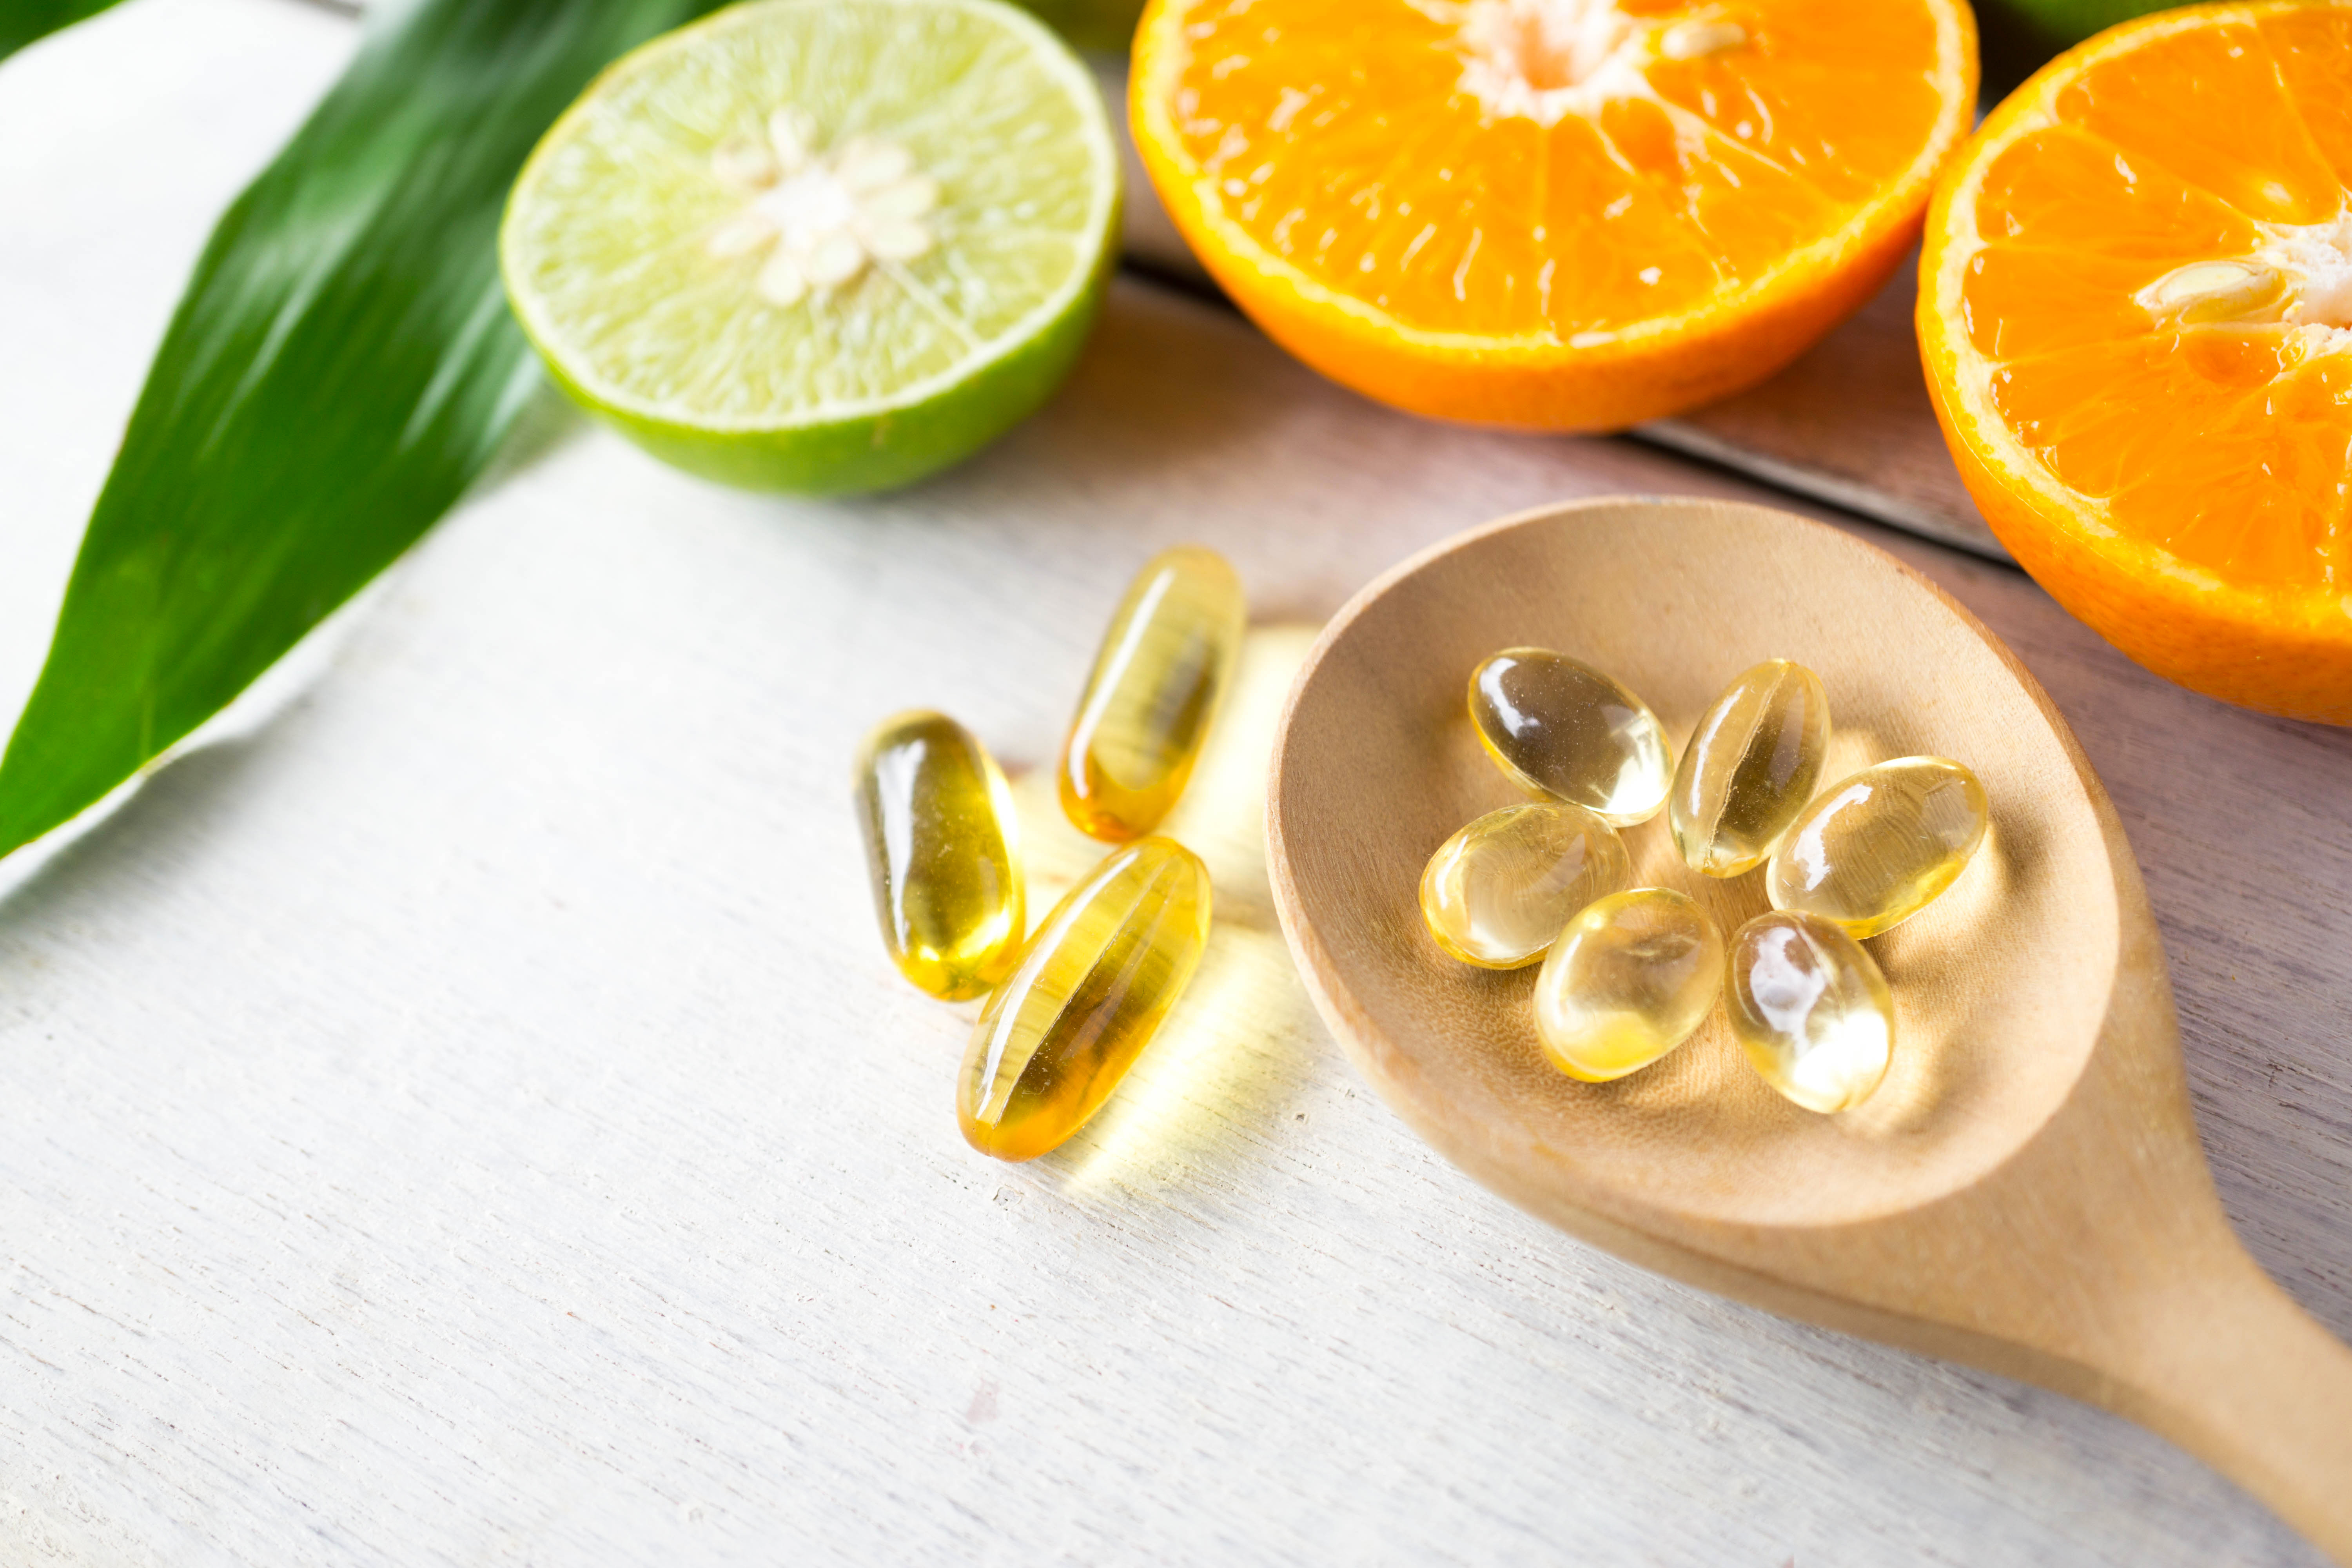 softgels on a wooden spoon next to oranges and lime